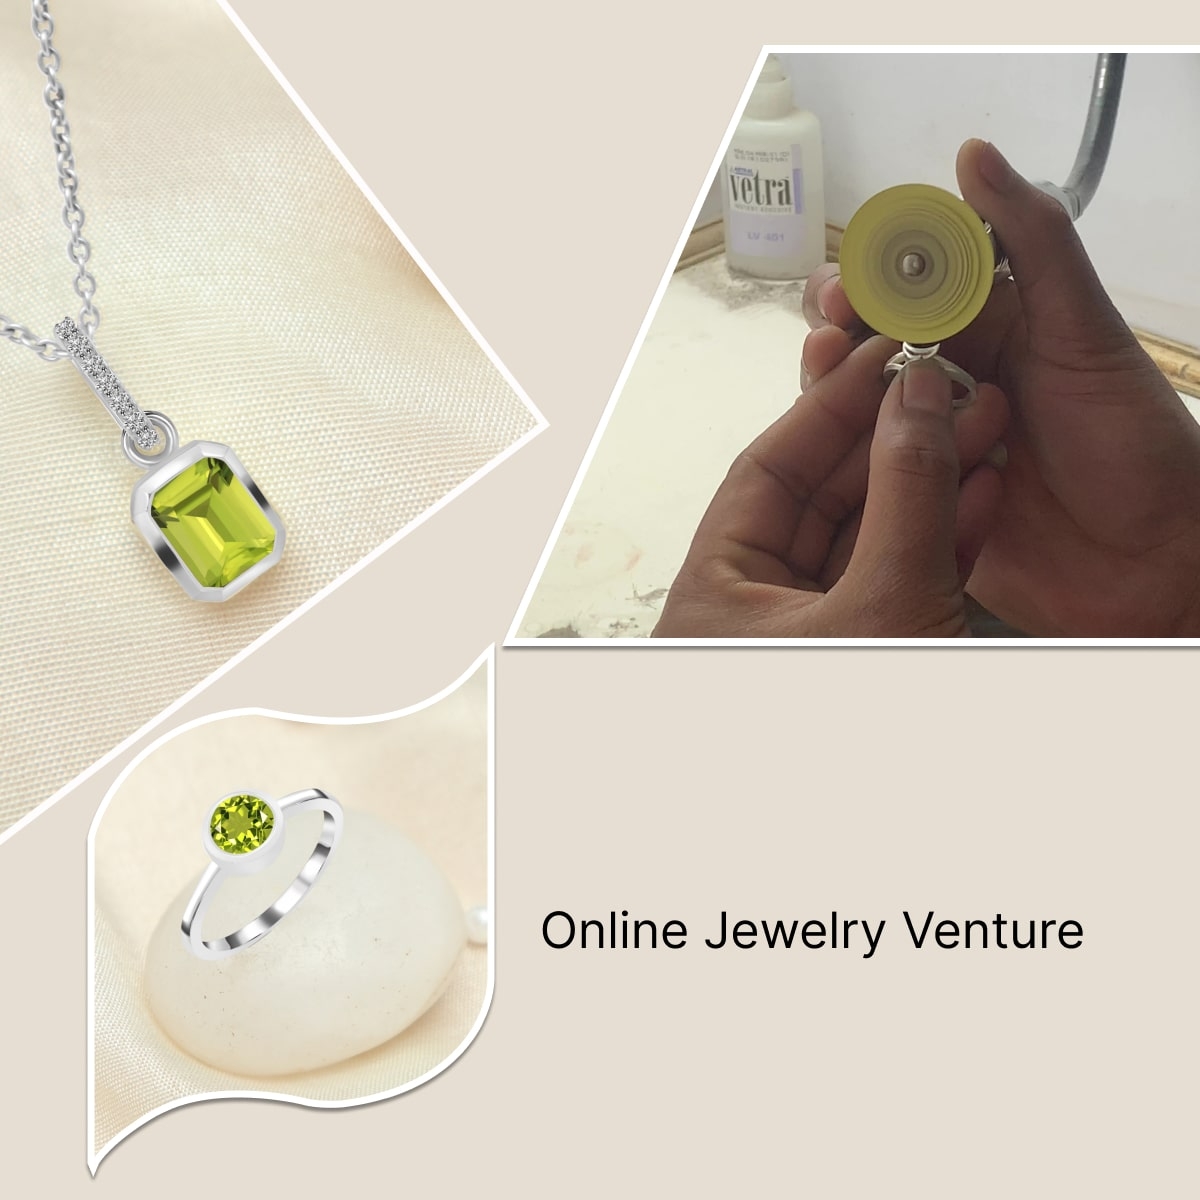 Your Online Jewelry Business